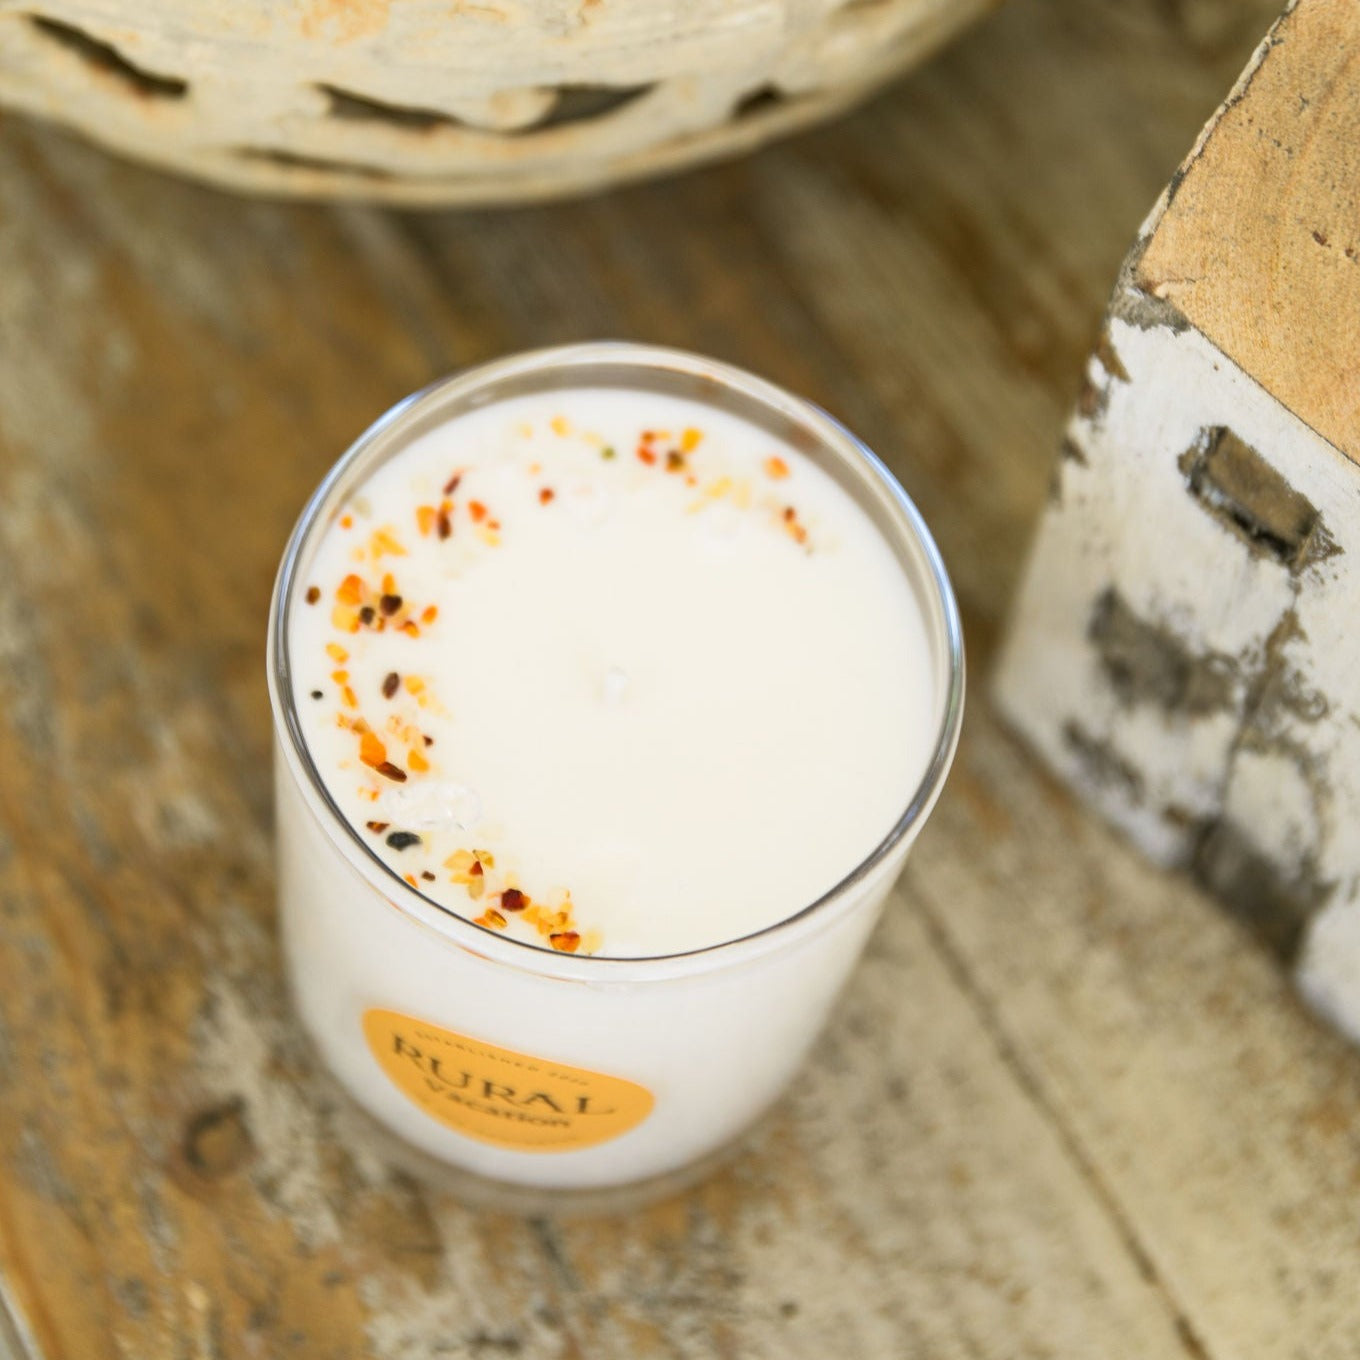 Classic Glass Candle: Vacation